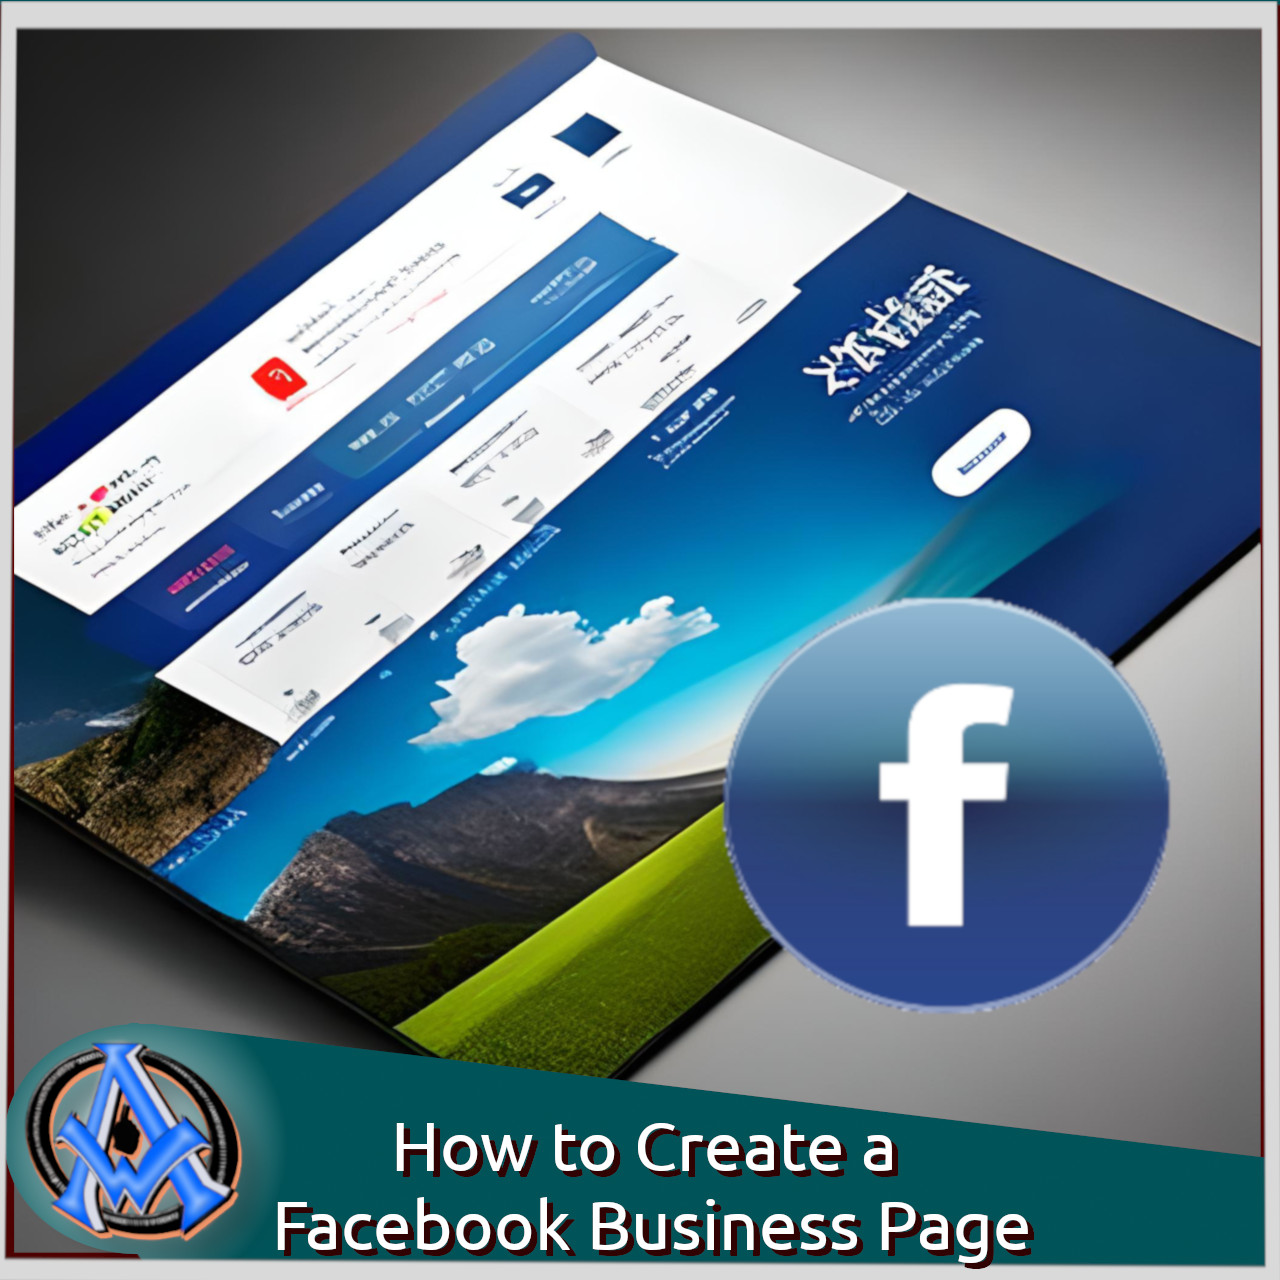 How to Create a Facebook Business Page1X1